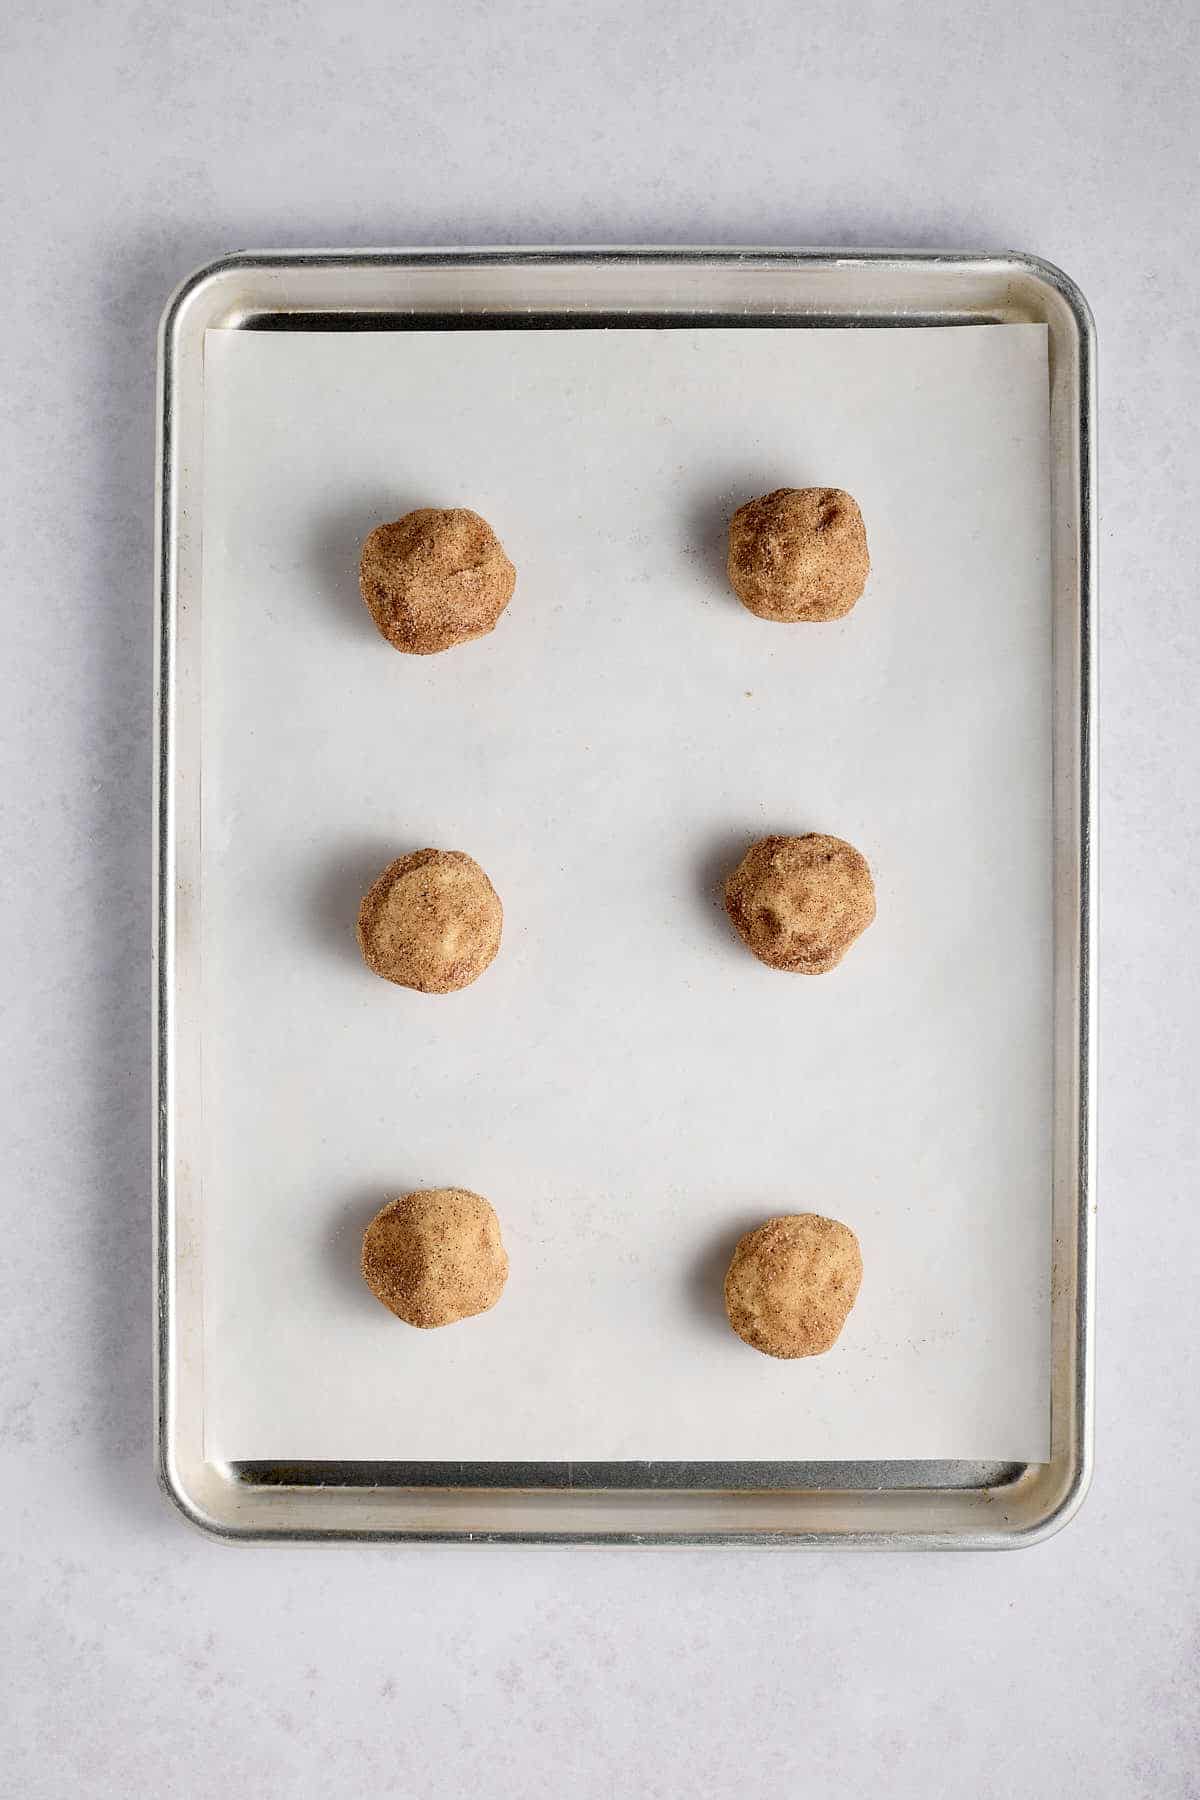 Cookie sheet filled with raw cookie dough balls.